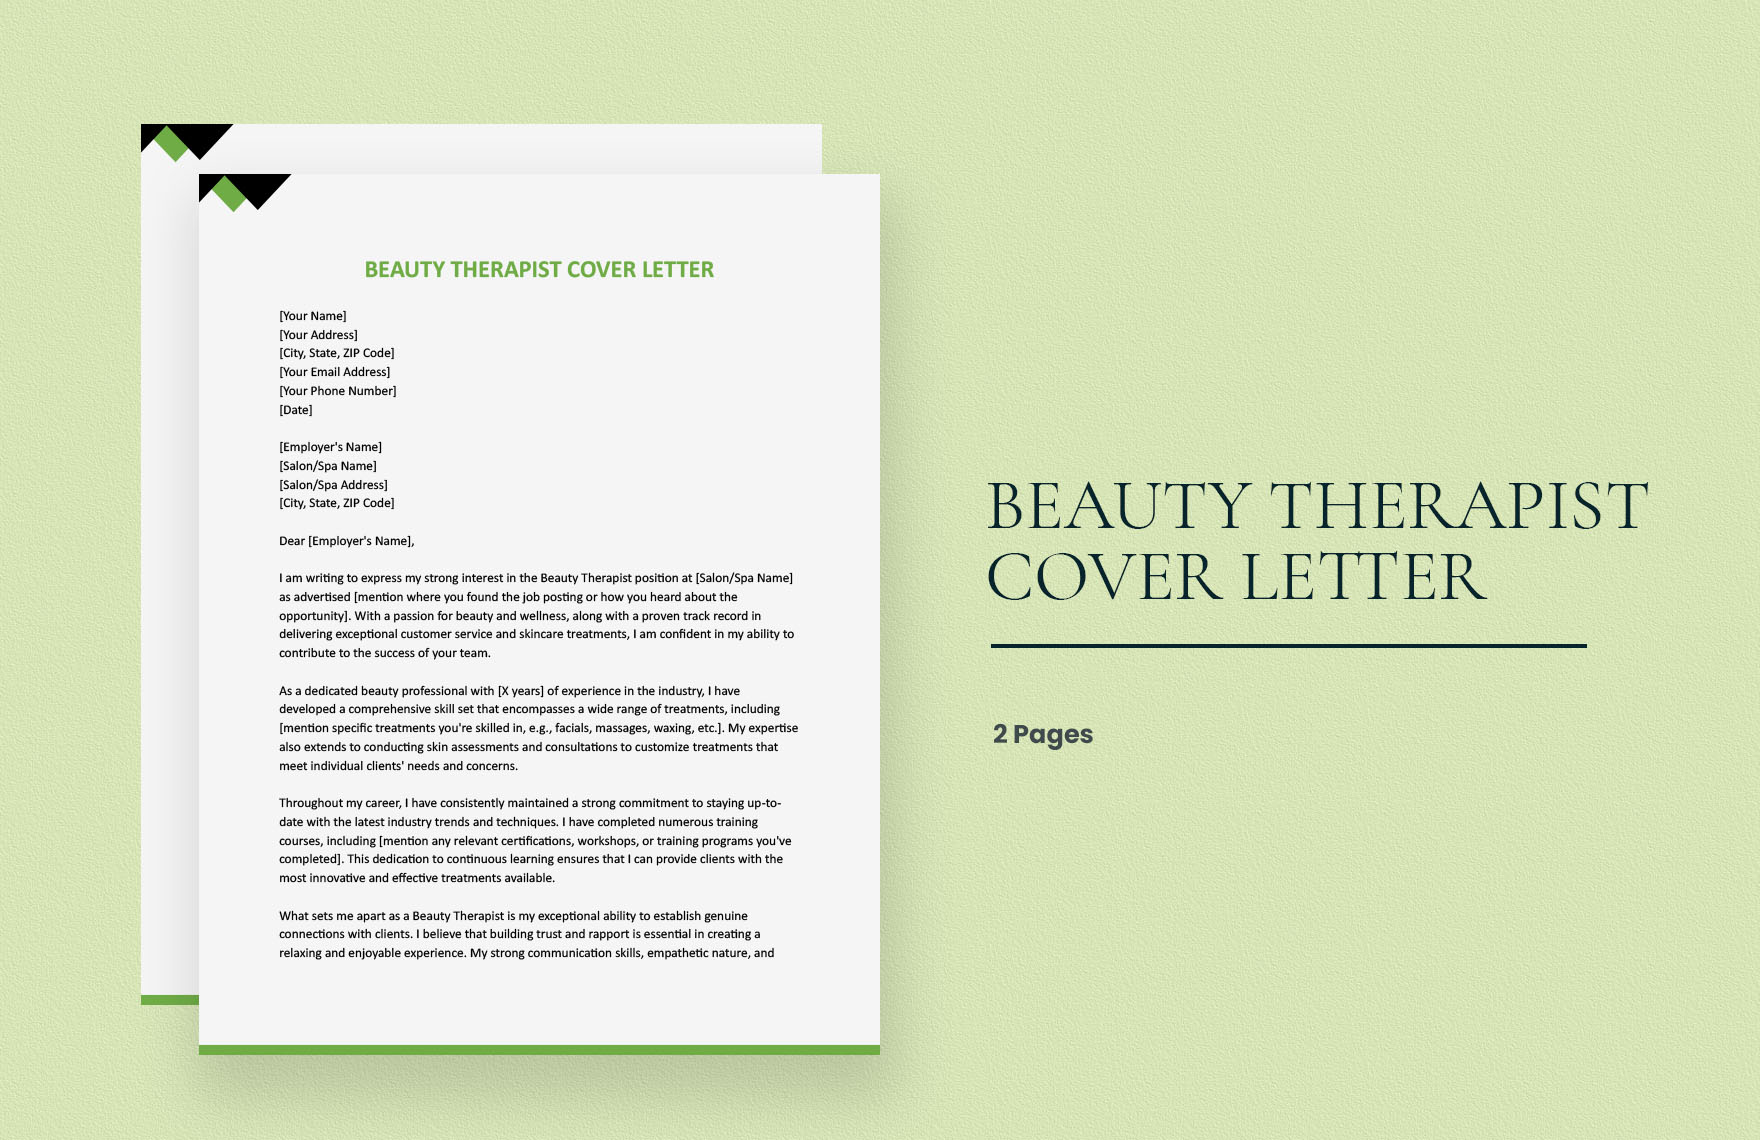 Free Beauty Therapist Cover Letter - Download in Word, Google Docs ...